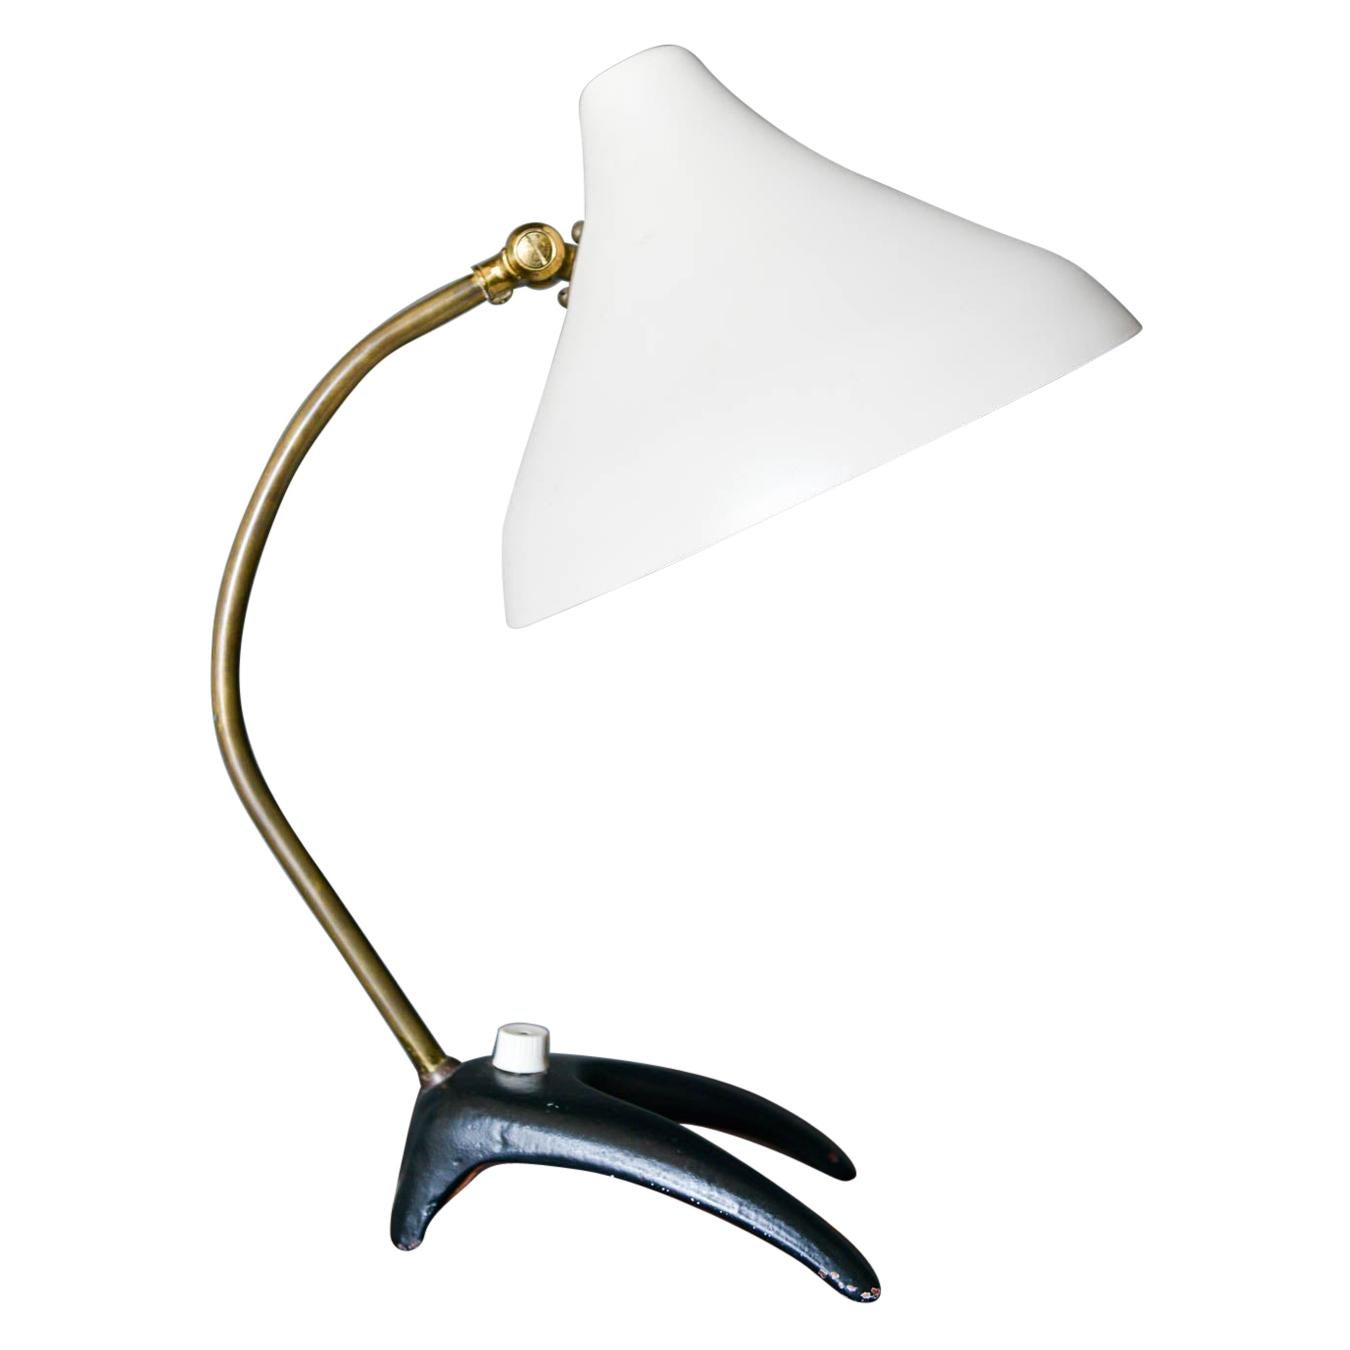 Ewa Varnamo 'Crow's Foot' Brass and Enameled Metal Desk or Table Lamp For Sale